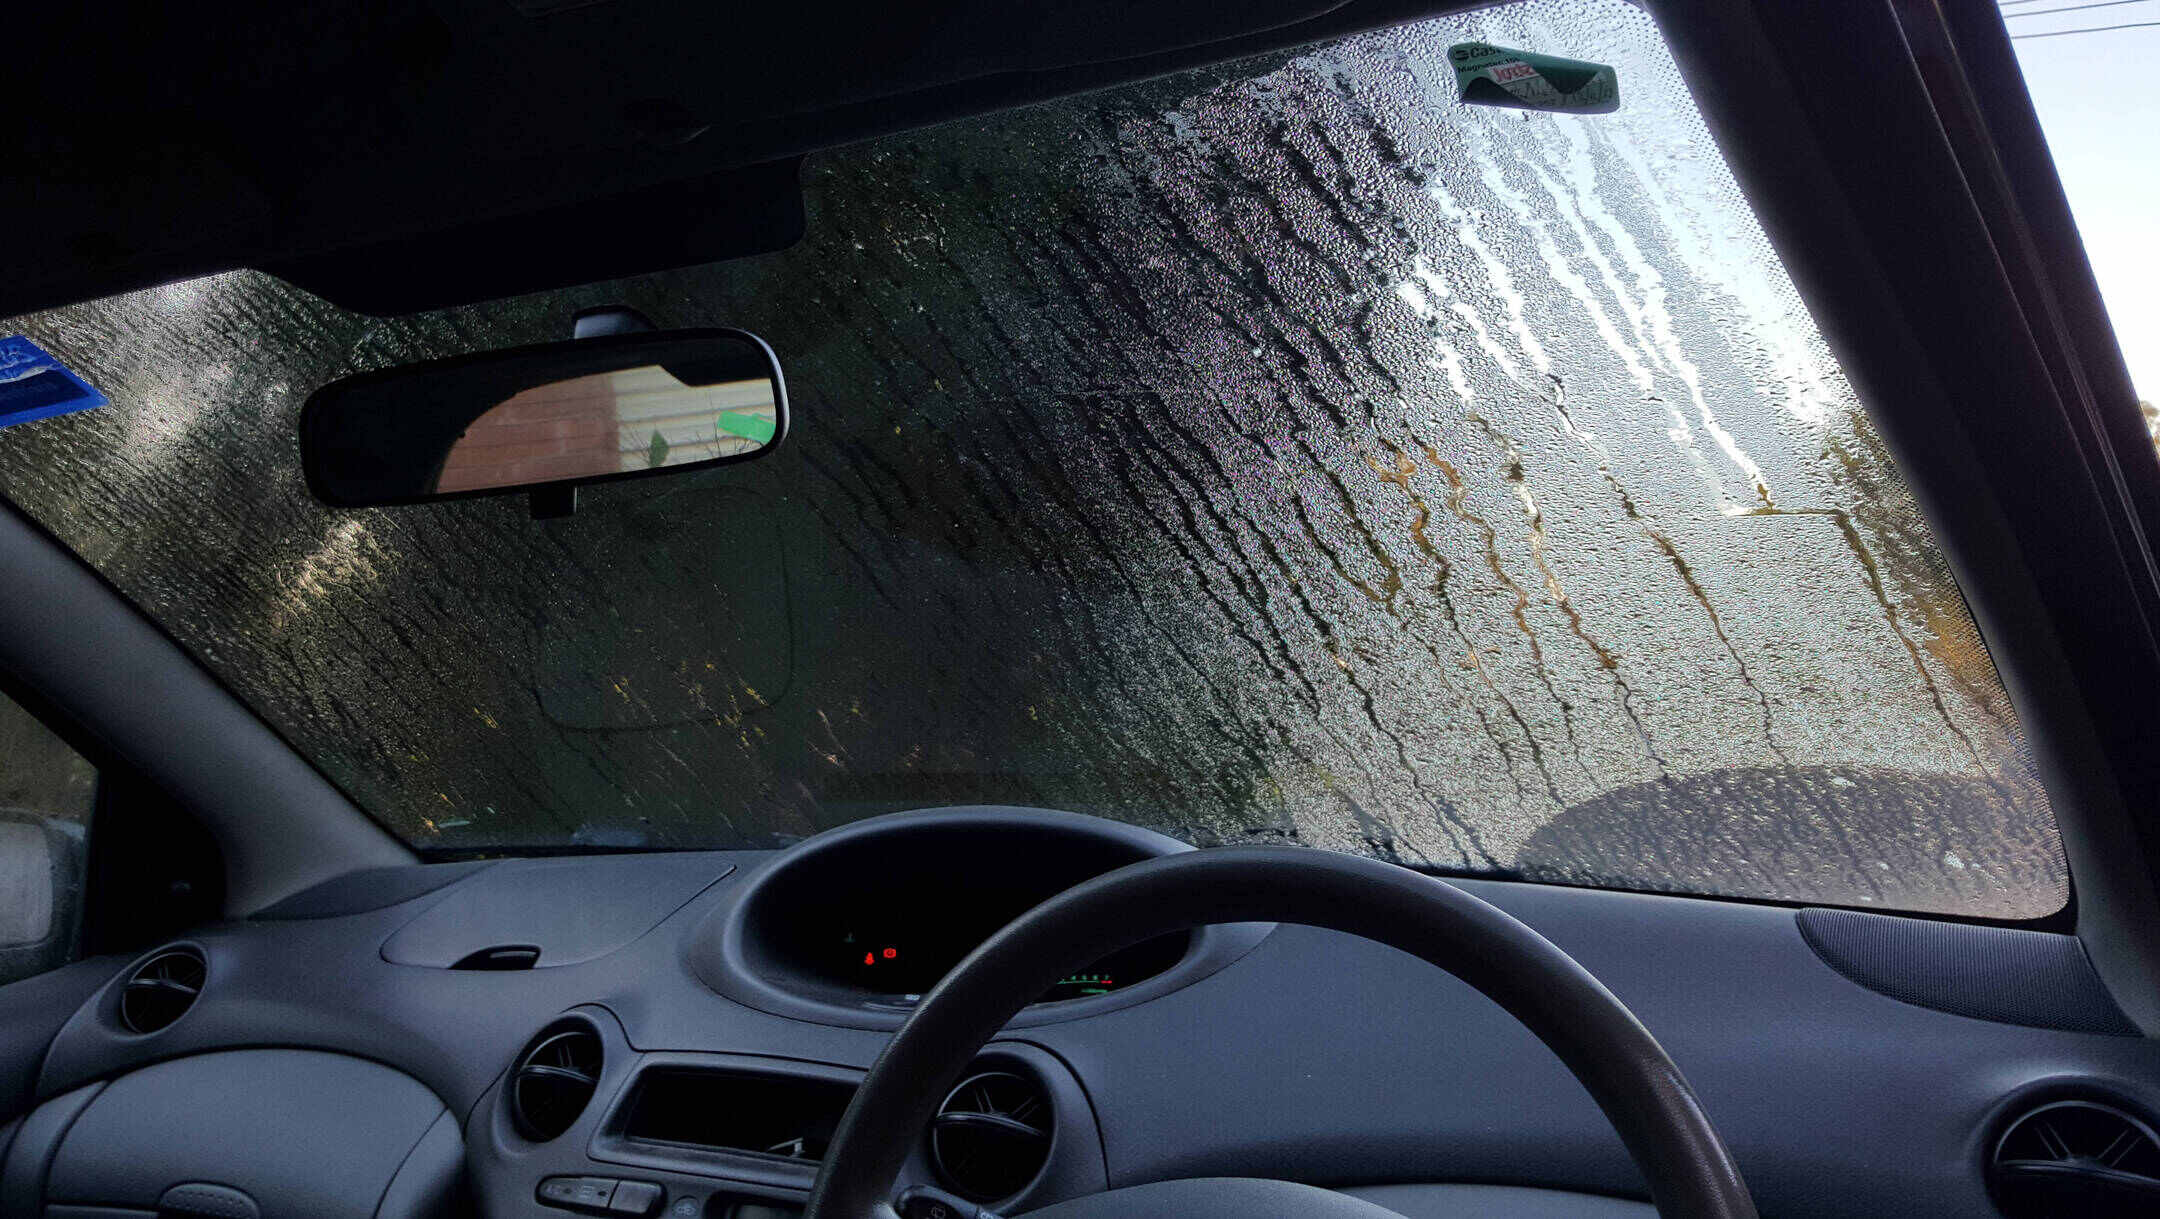 How To Prevent Inside Car Windows From Fogging Up